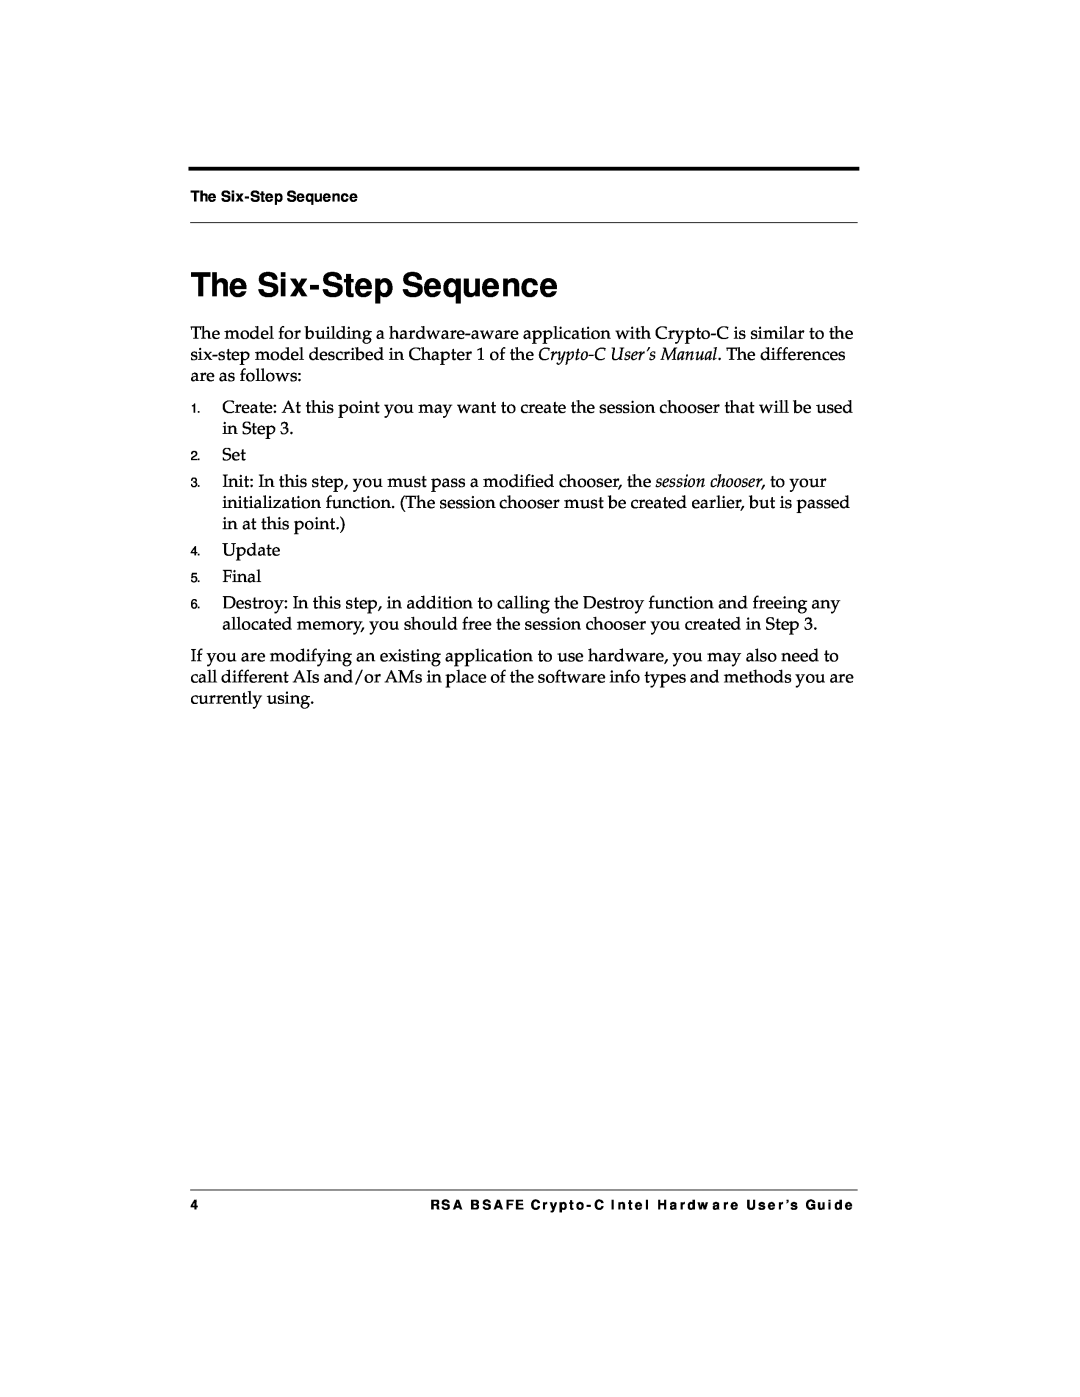 RSA Security 4.3 manual The Six-StepSequence 